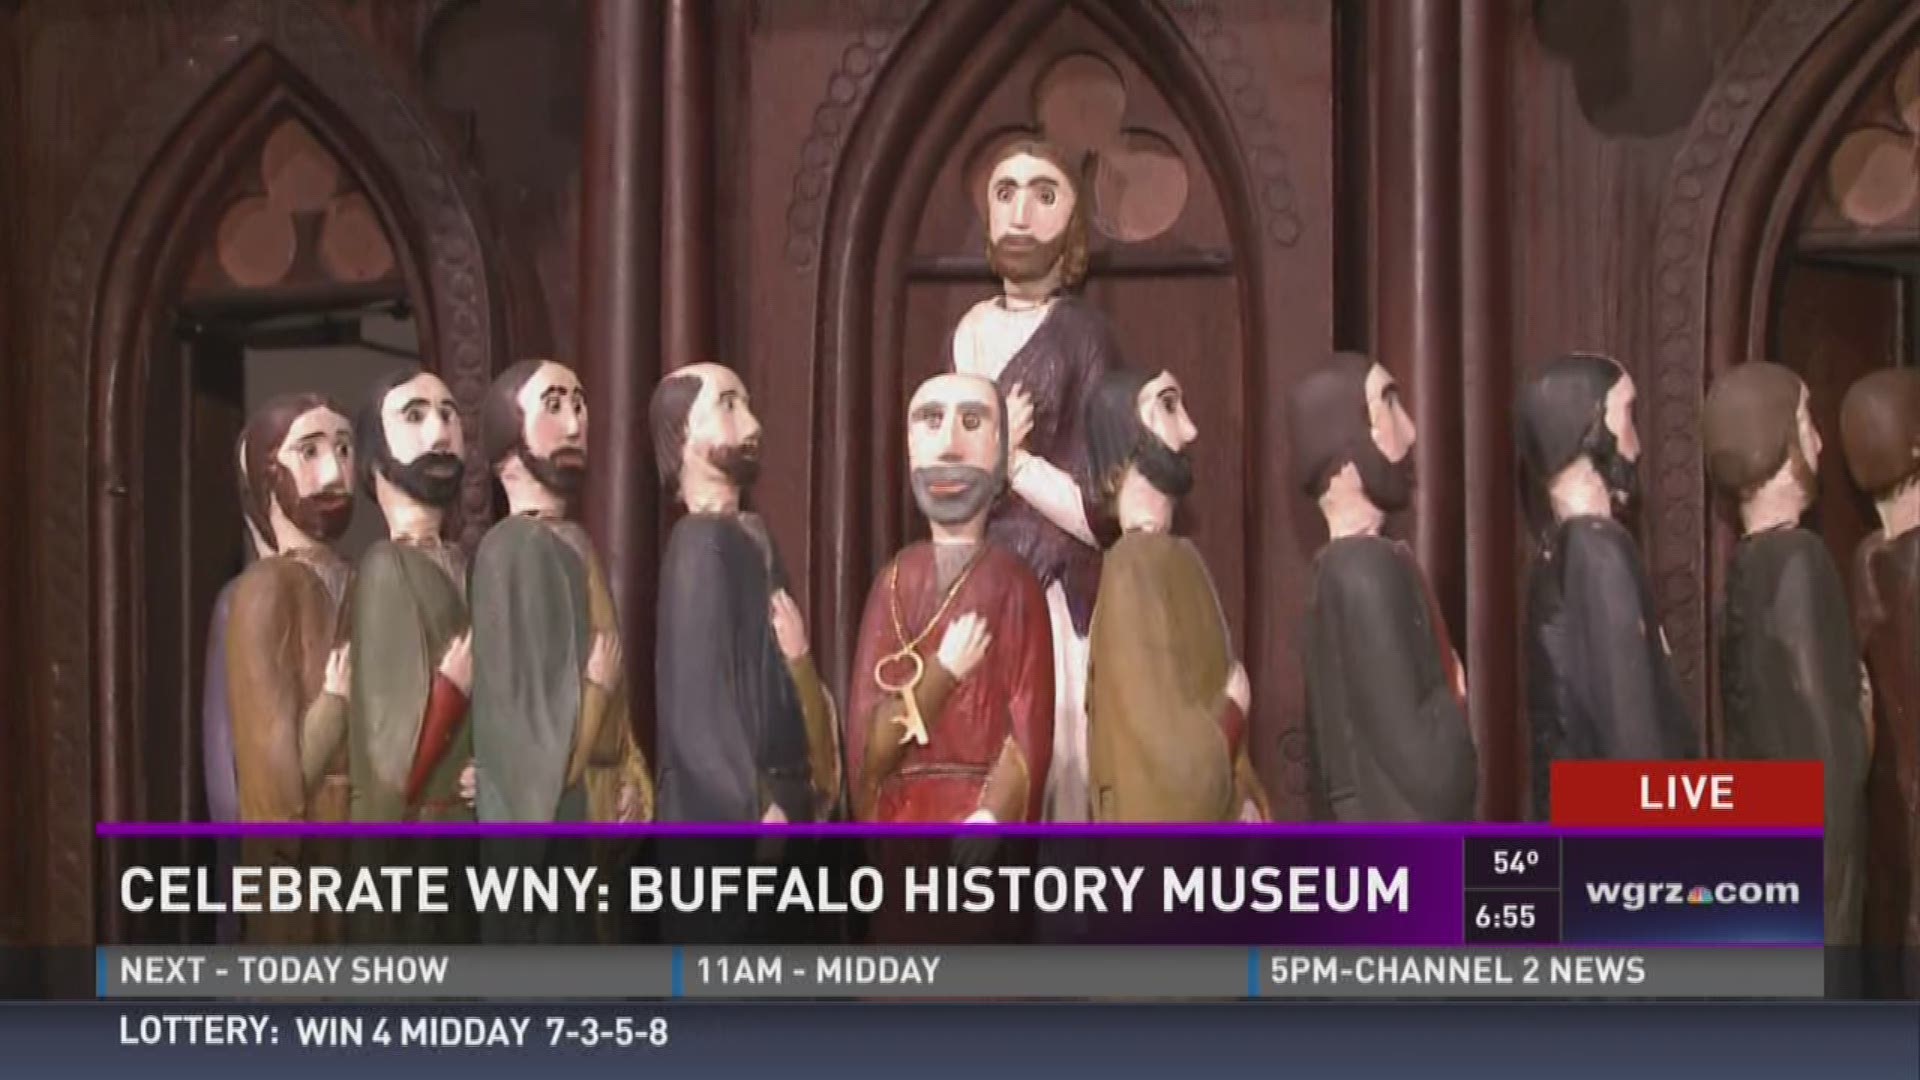 Daybreak's Kevin O'Neill Celebrates WNY at the Buffalo History Museum, where he learns more about the apostolic clock.